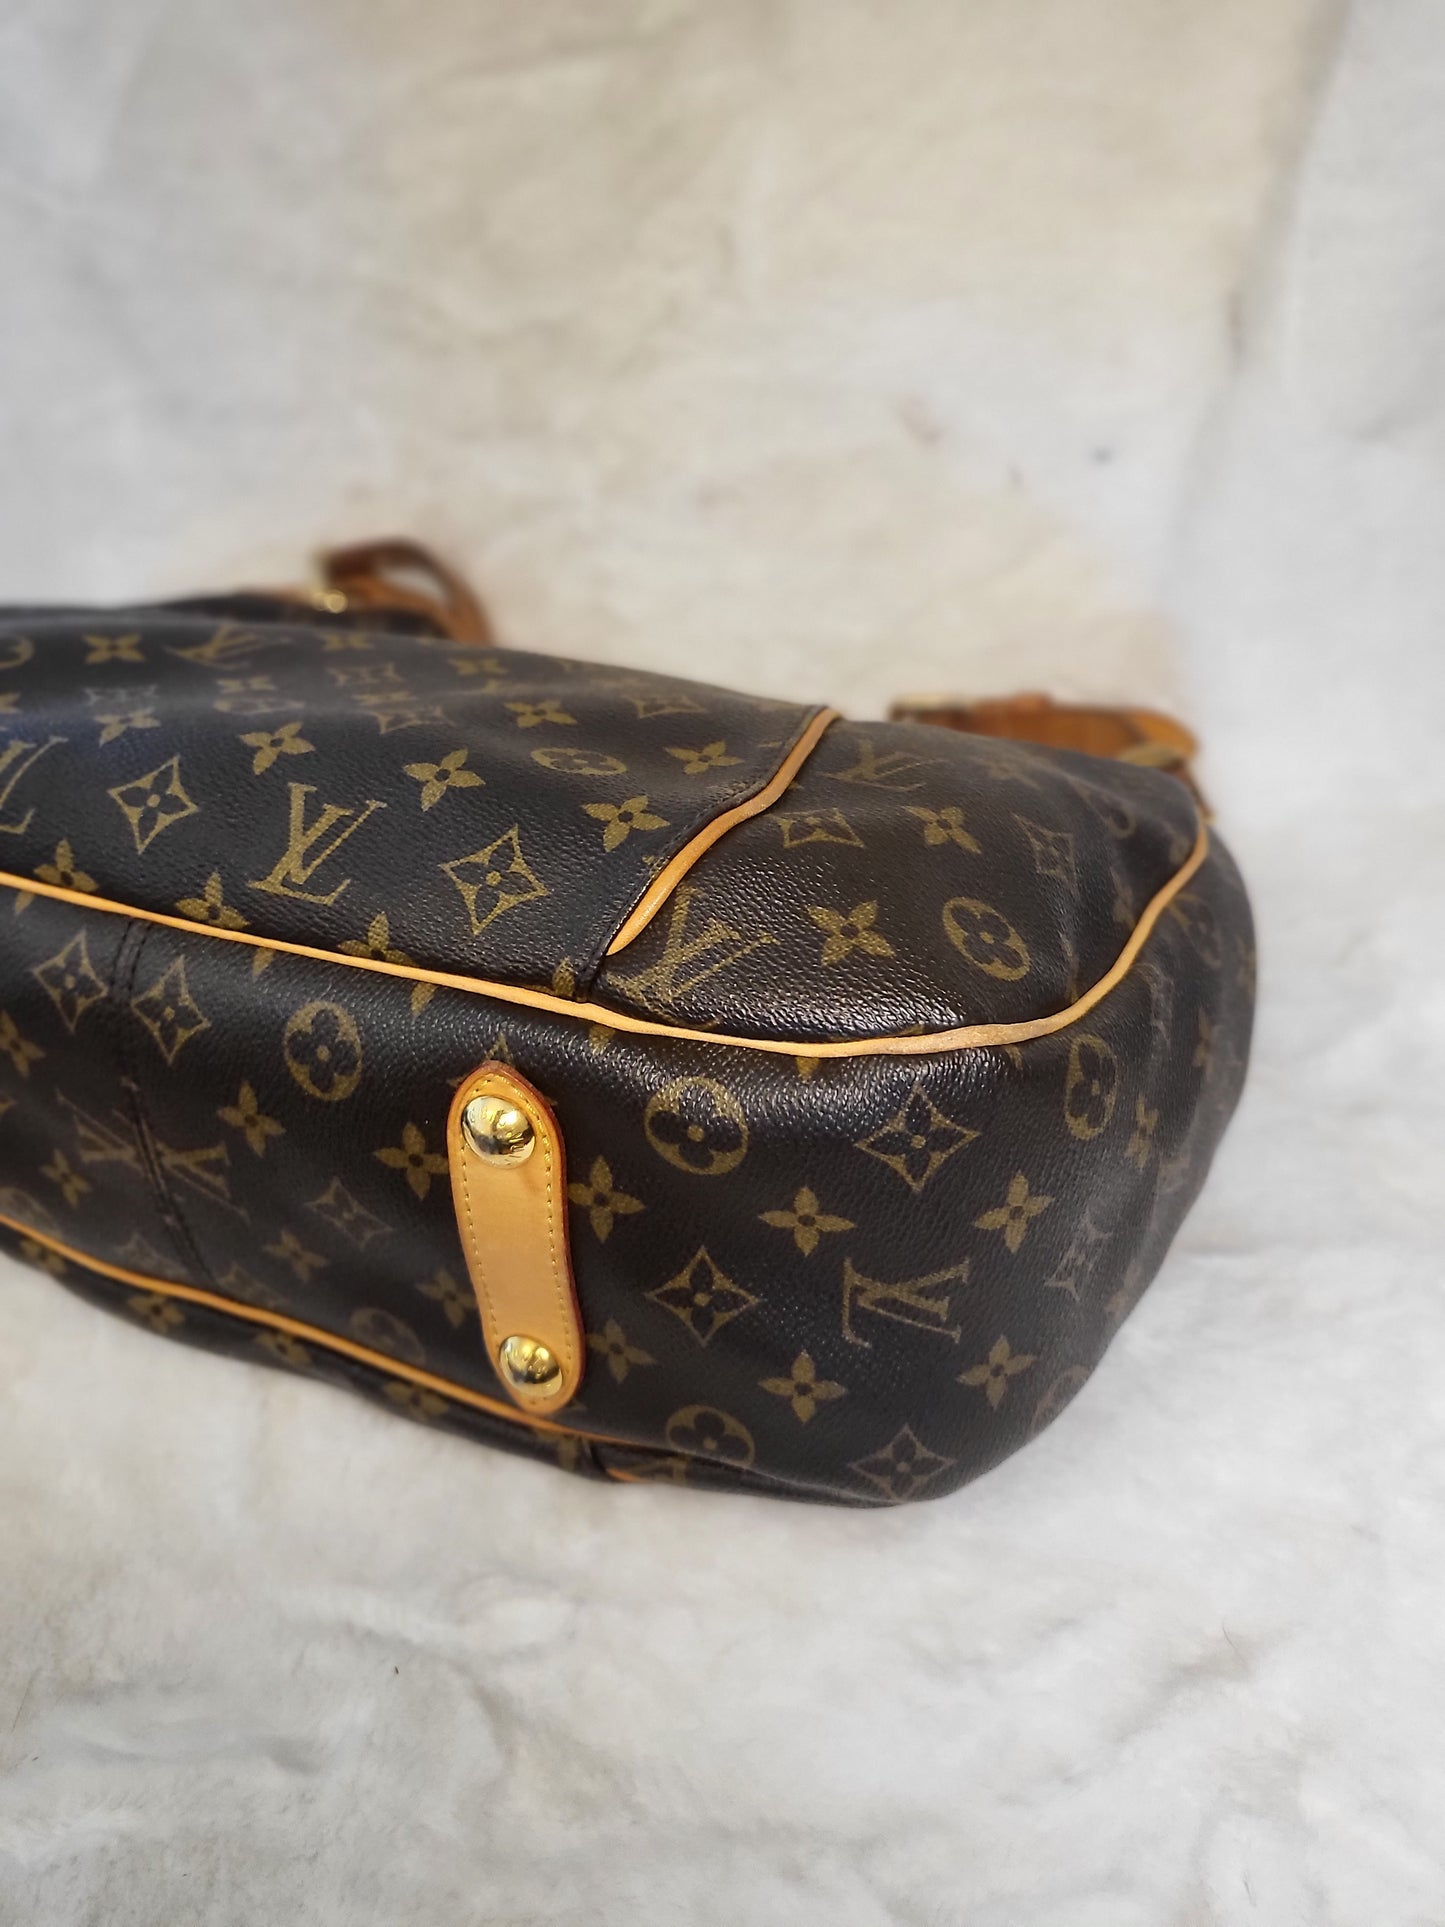 Authentic pre-owned Louis Vuitton Galliera gm tote shoulder bag